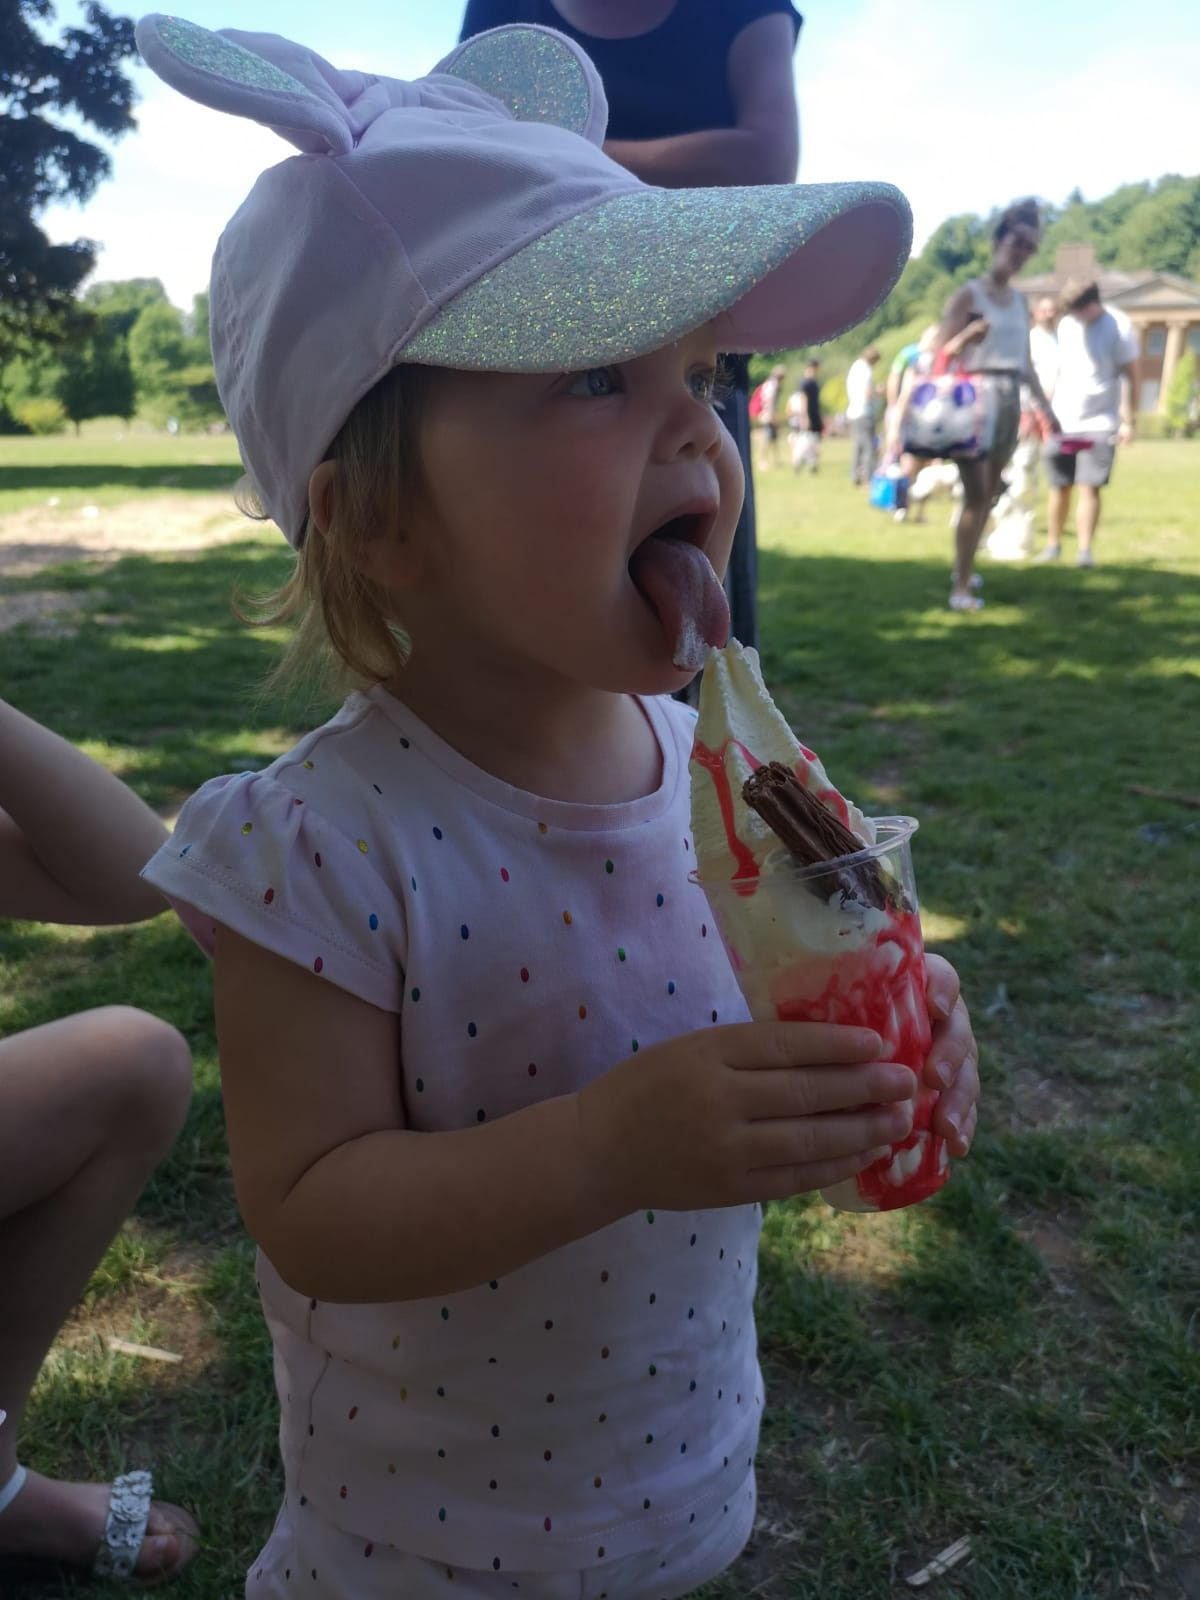 Two-year-old Lola Ava Hingley enjoyed an ice cream while she was out with her mother Sara during a picnic at Himley Park